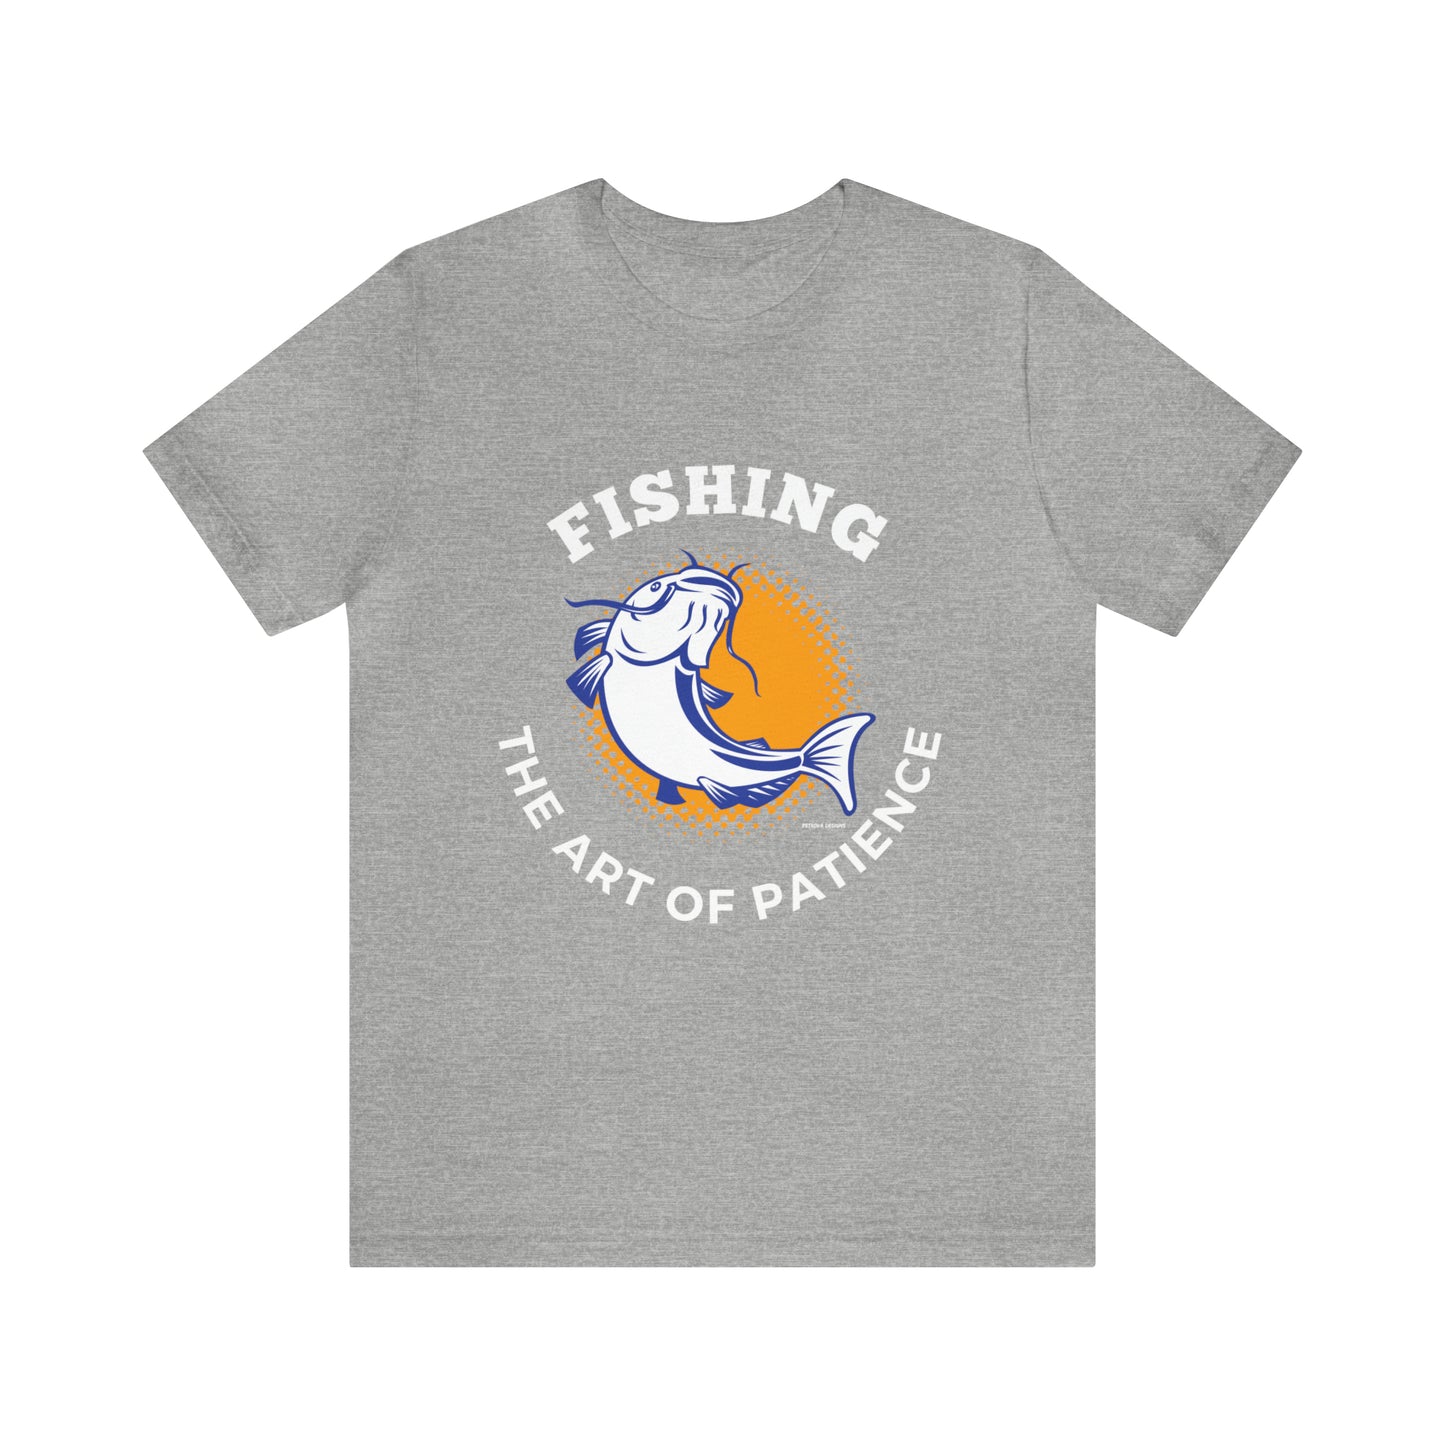 Athletic Heather T-Shirt Tshirt Design Gift for Friend and Family Short Sleeved Shirt Fishing Hobby Aesthetic Petrova Designs